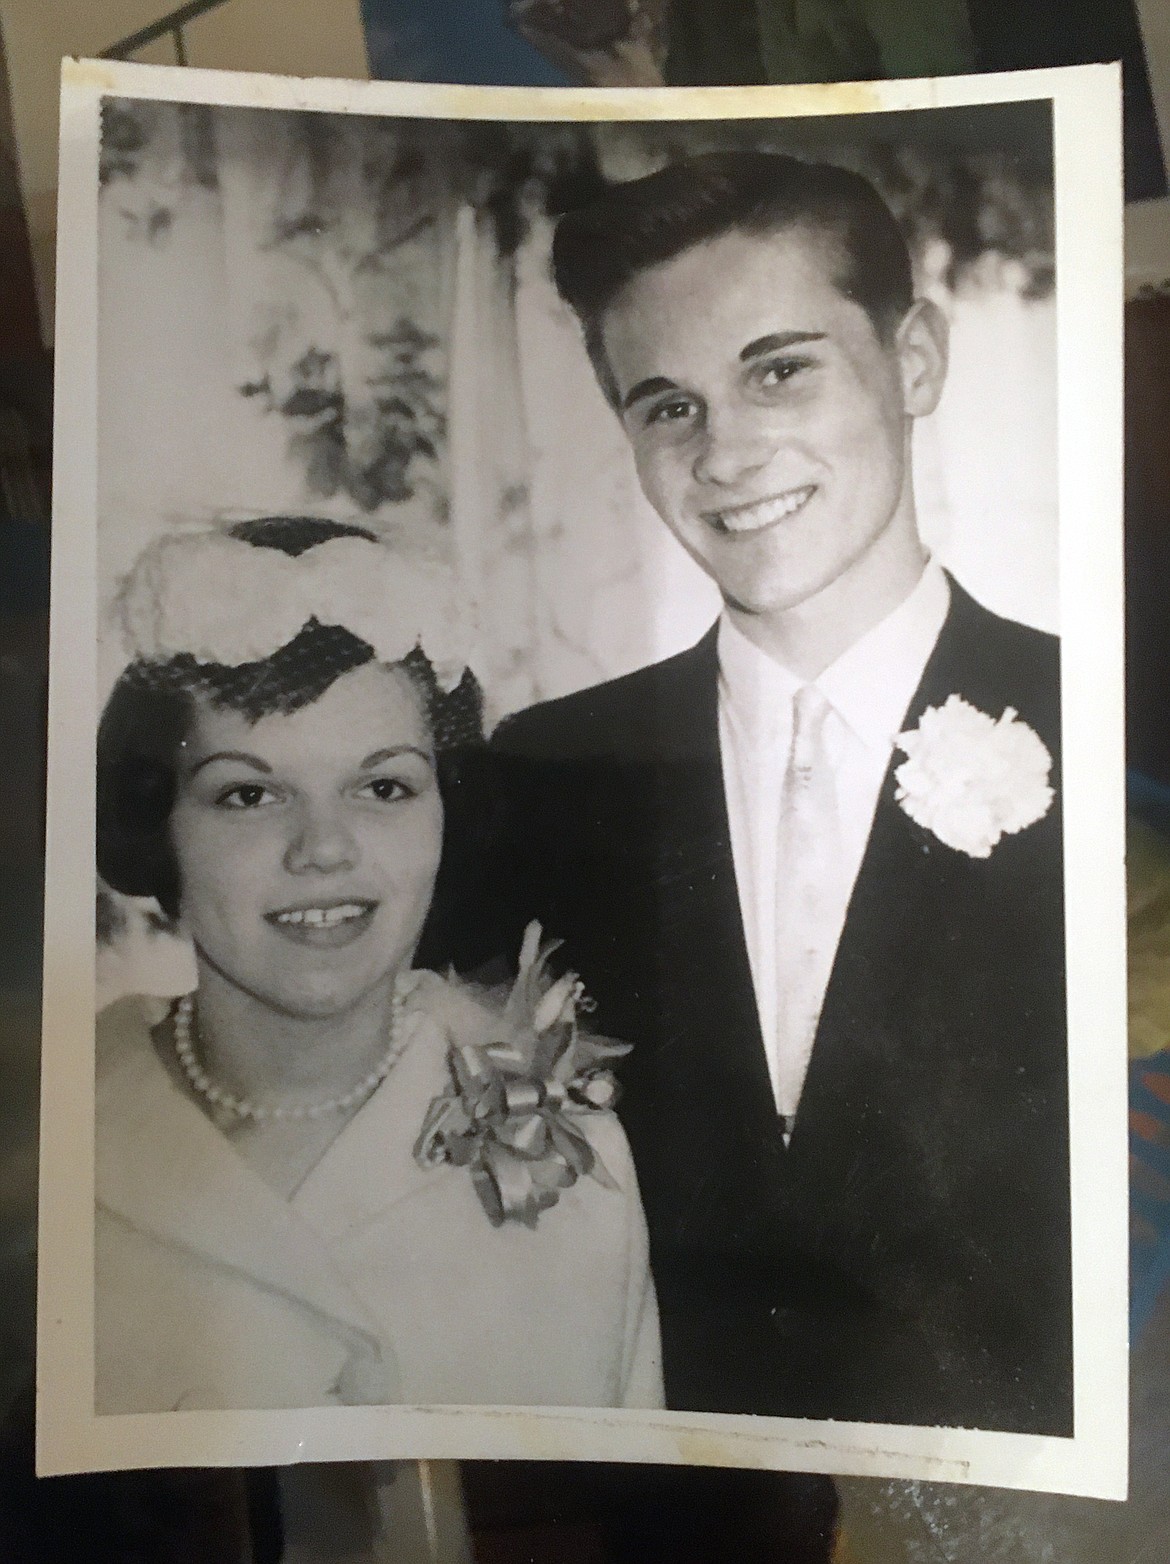 Cliff and Sharon Harris on their wedding day, March 23, 1961,